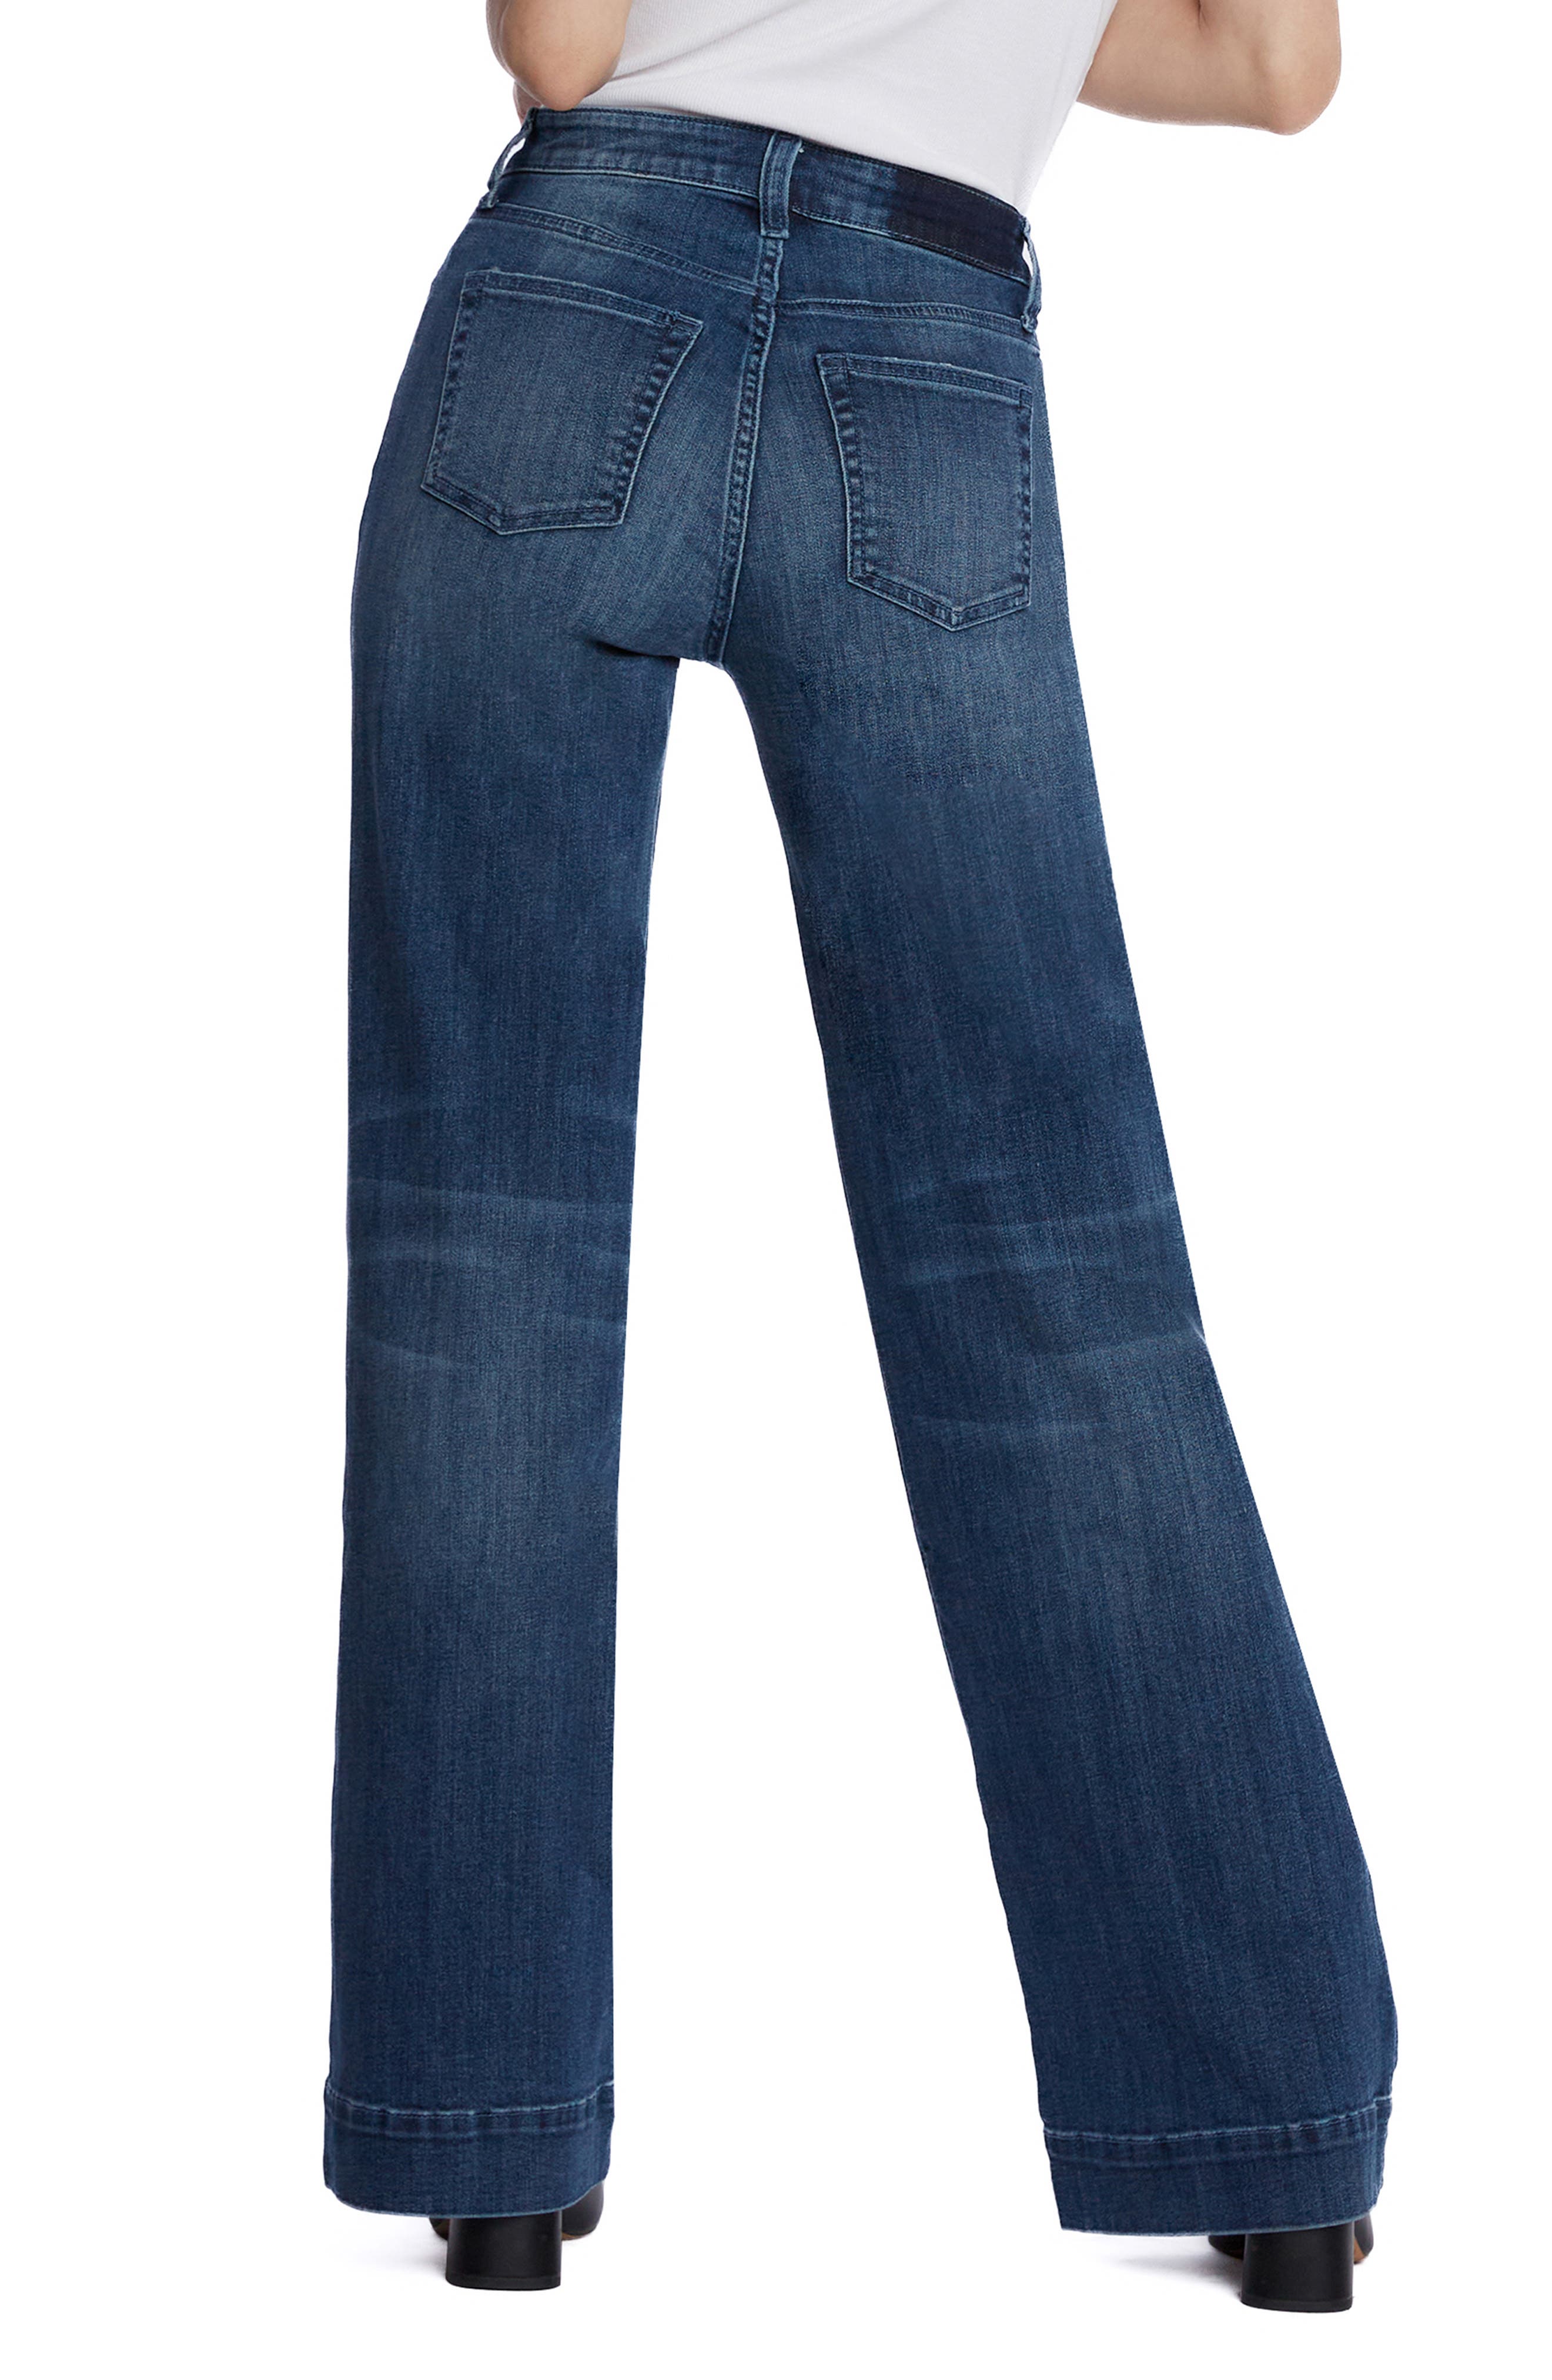 HINT OF BLU Myra Mid Rise Wide Leg Jeans in Blue